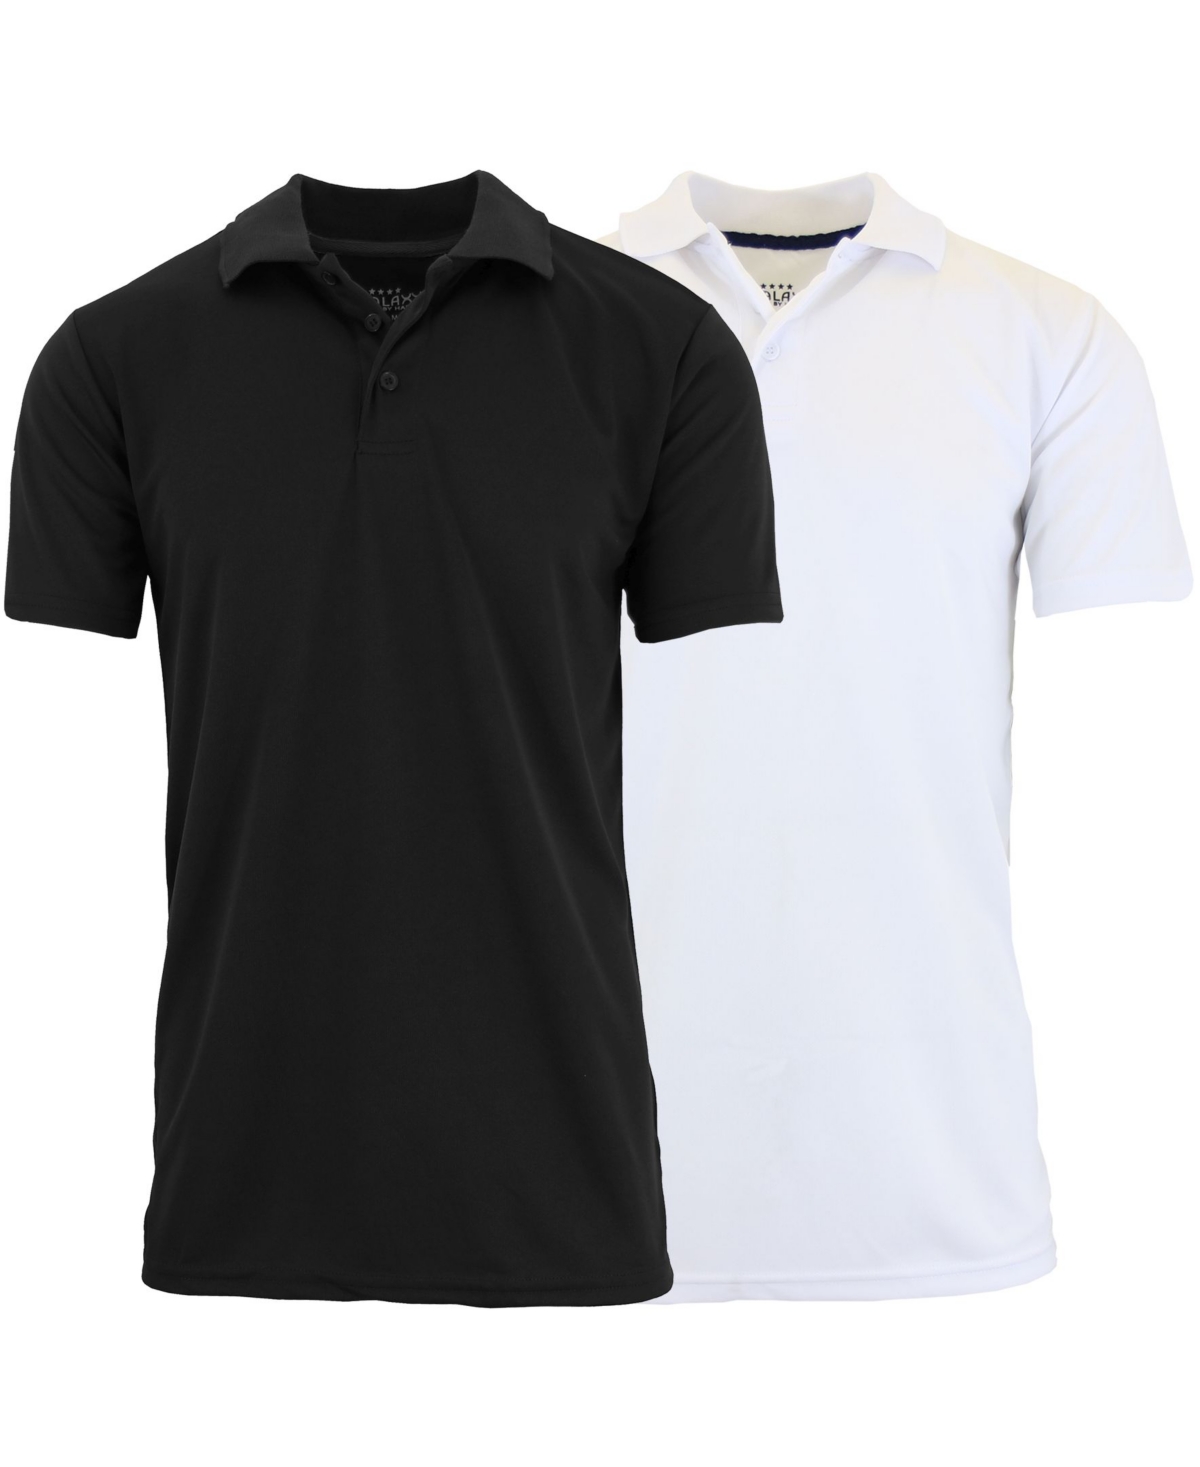 Men's Tag less Dry-Fit Moisture-Wicking Polo Shirt, Pack of 2 - White